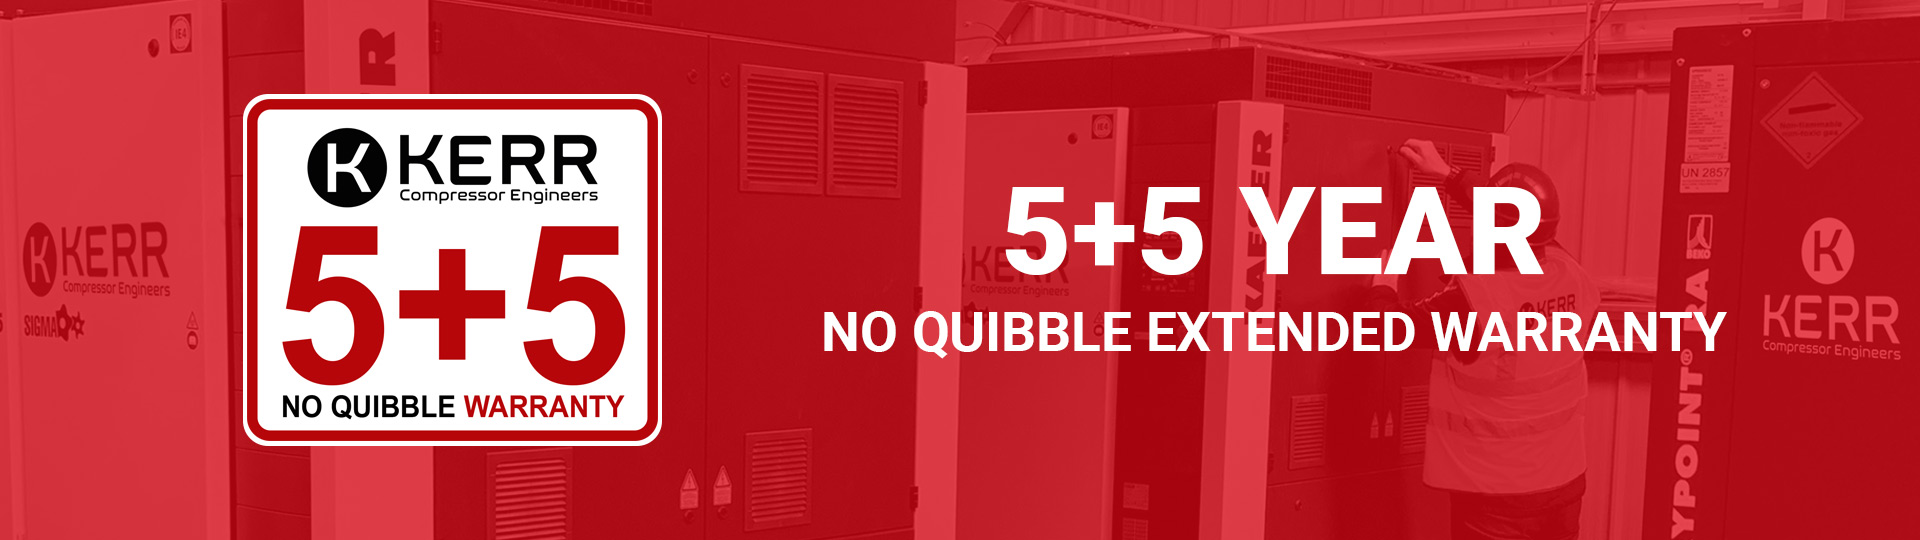 5+5 NO QUIBBLE EXTENDED WARRANTY